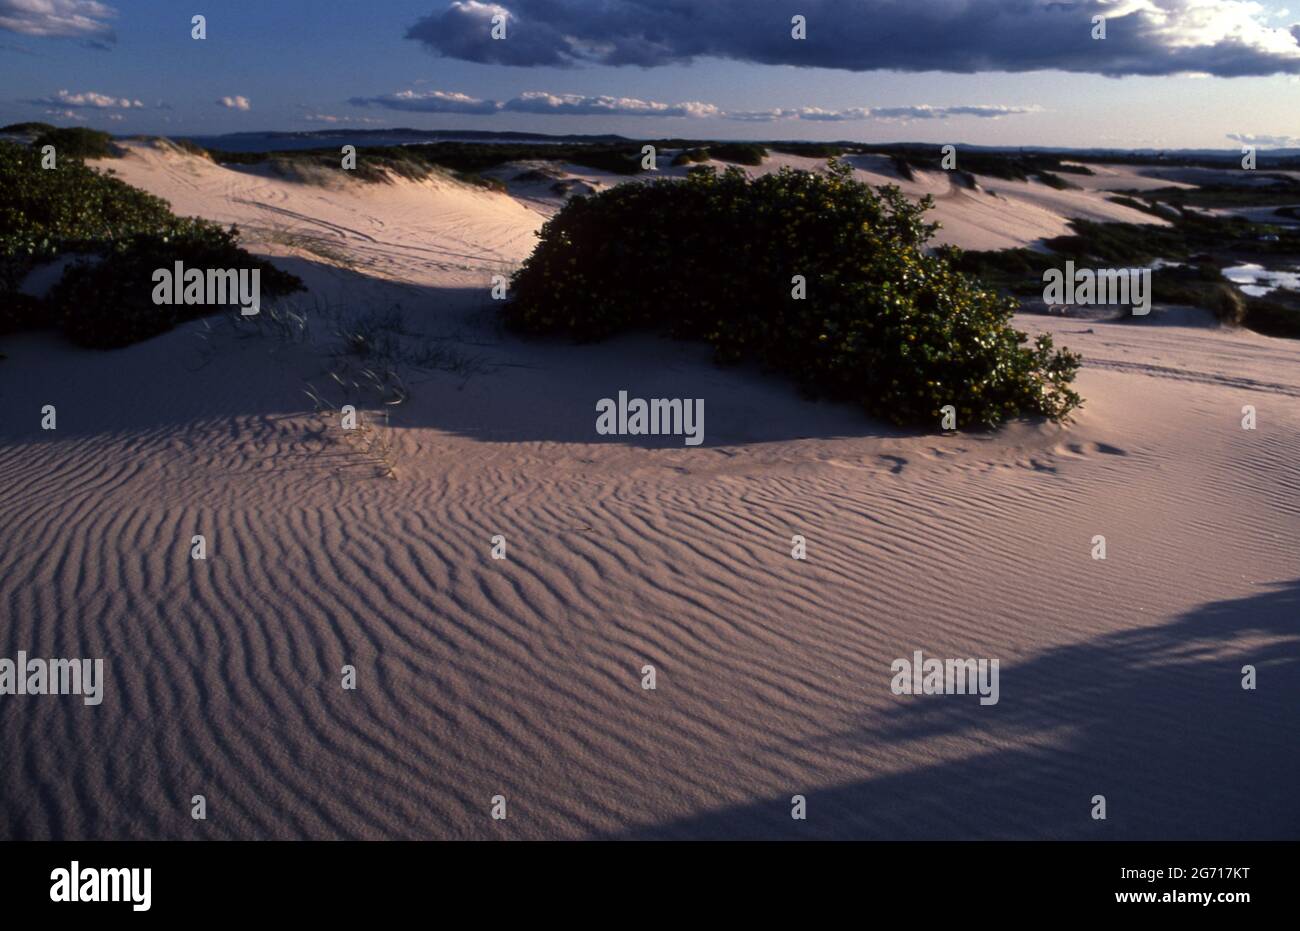 SAND DUNES, NINE MILE BEACH ALSO CALLED TUNCURRY BEACH, LAKE MACQUARIE AREA, NEW SOUTH WALES. Stock Photo